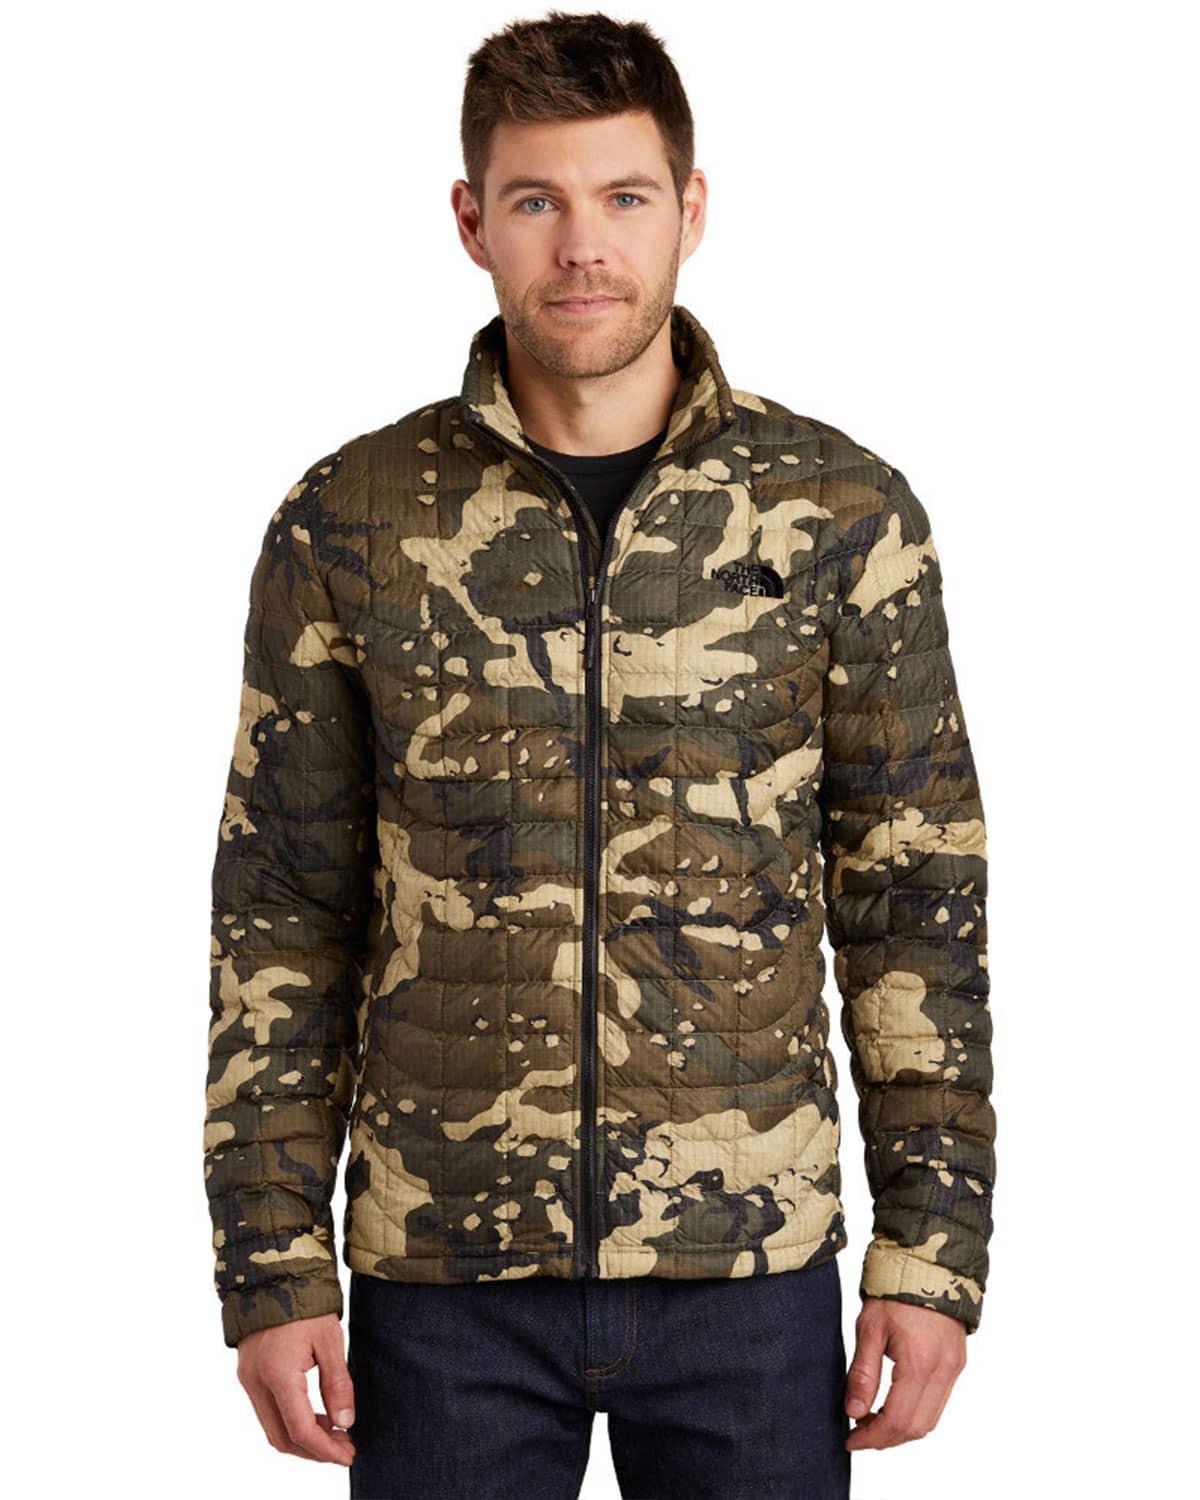 The North Face NF0A3LH2 Mens Jacket